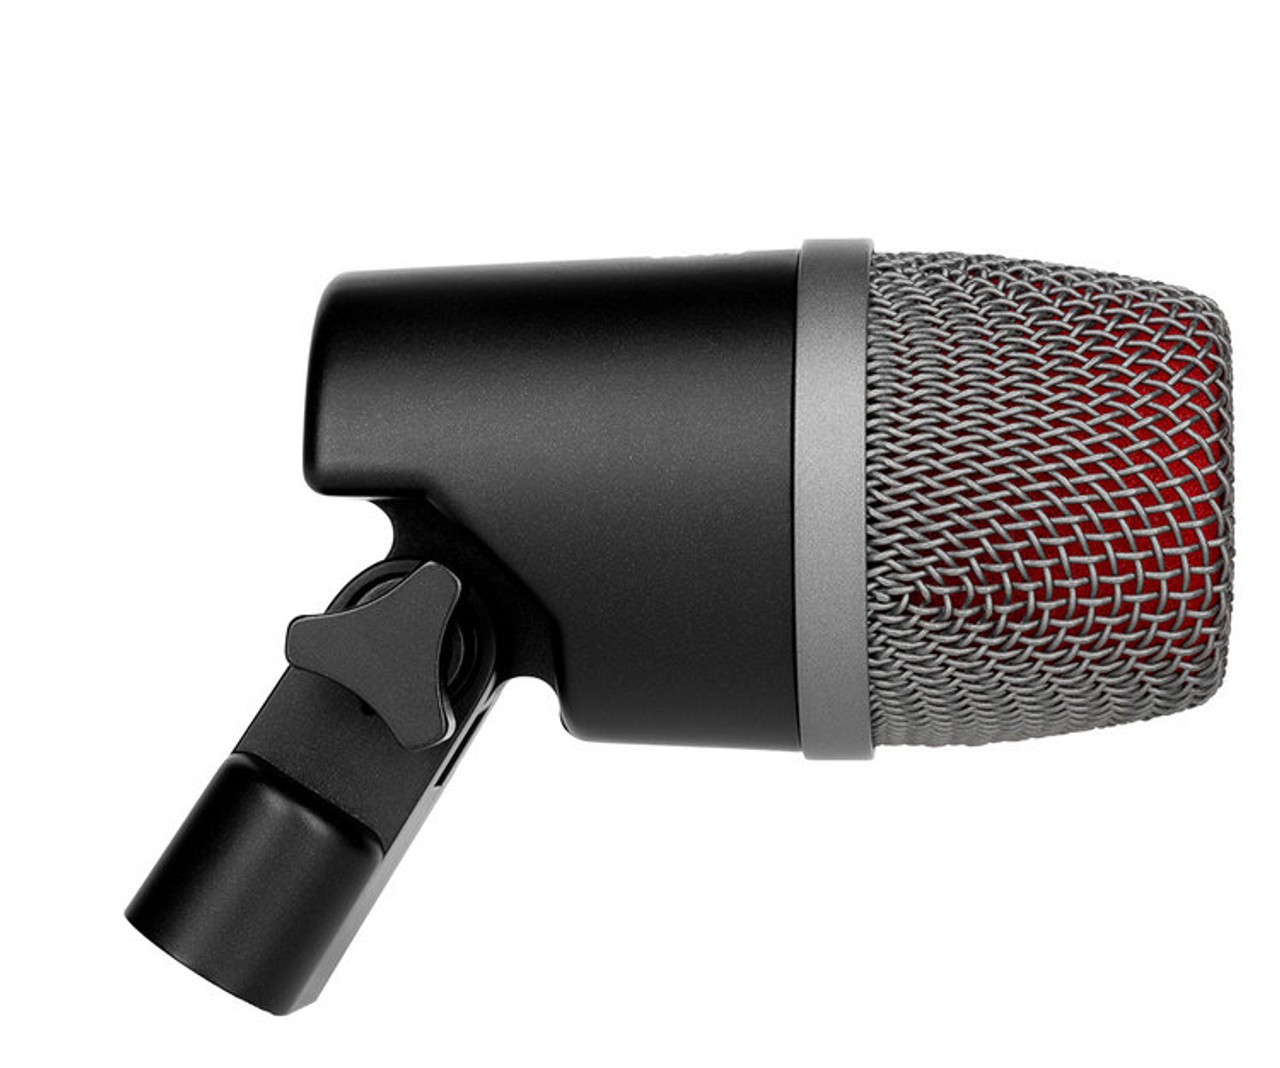 V KICK Microphone - SE Electronics Kick Drum Microphone with Classic & Modern Voices Supercardioid